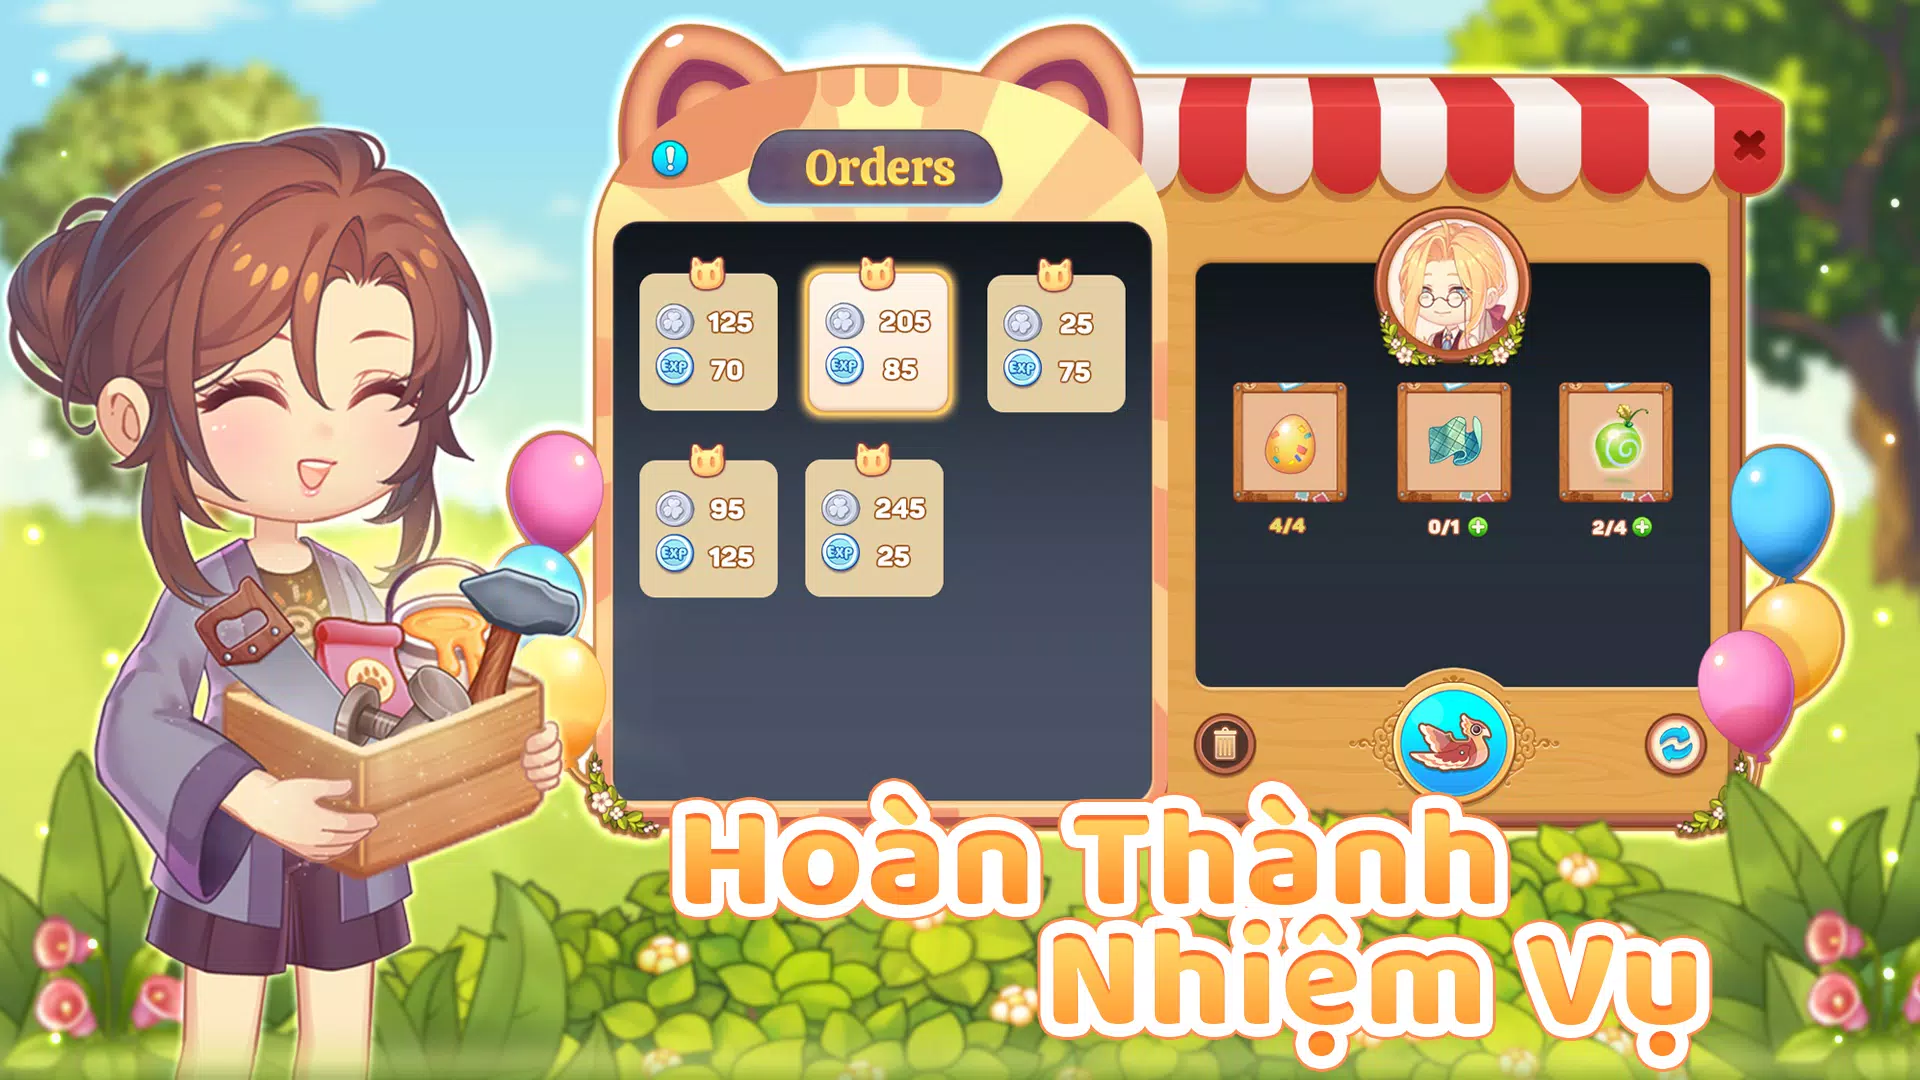 Kawaii Trial - Cute Animals v1.0.1 MOD APK -  - Android & iOS  MODs, Mobile Games & Apps